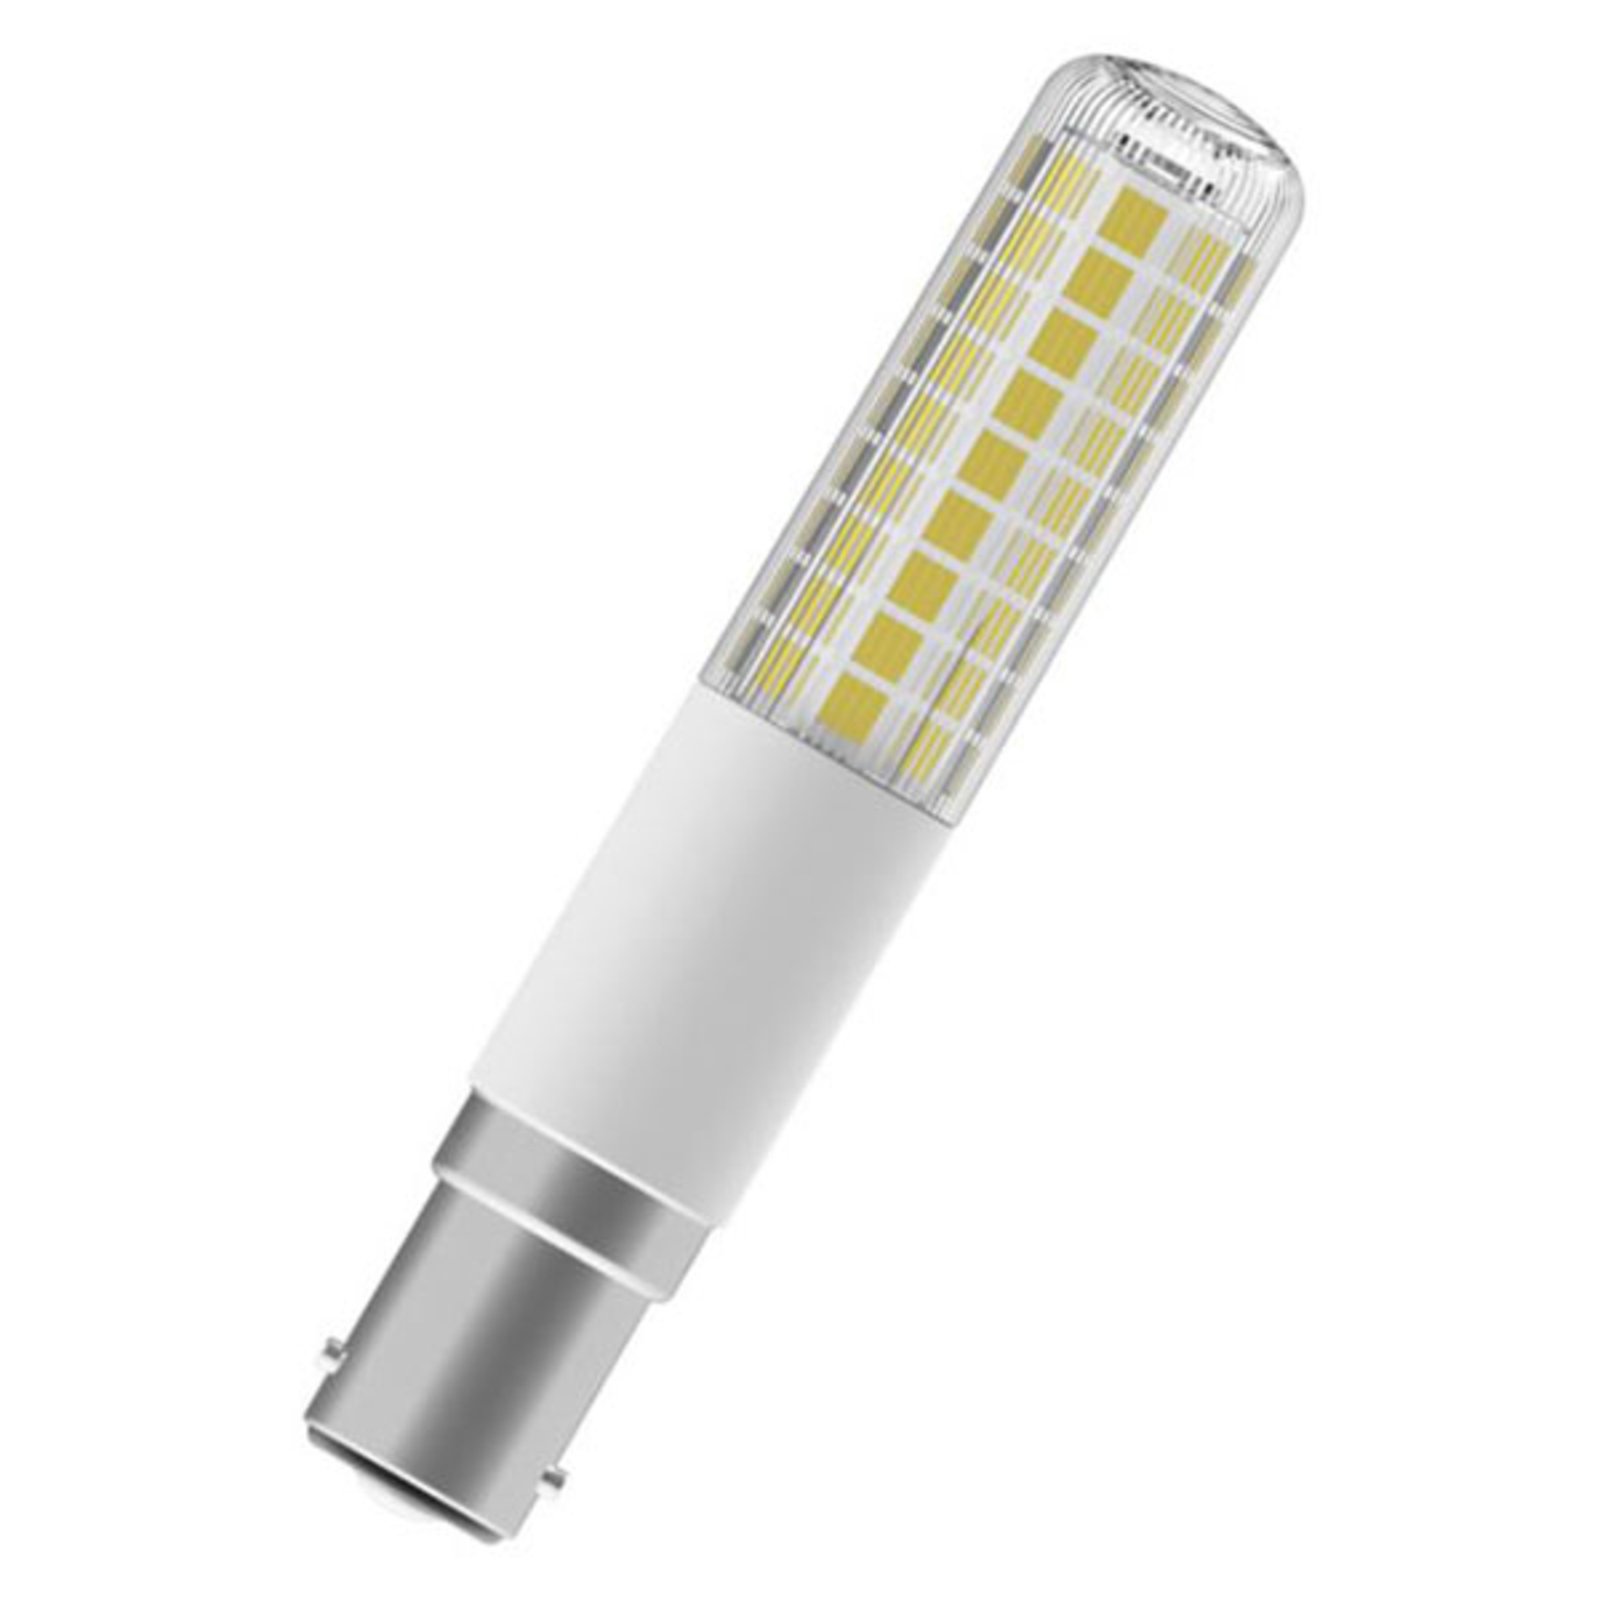 OSRAM Special T LED bulb B15d 9 W 2,700 K dimmable